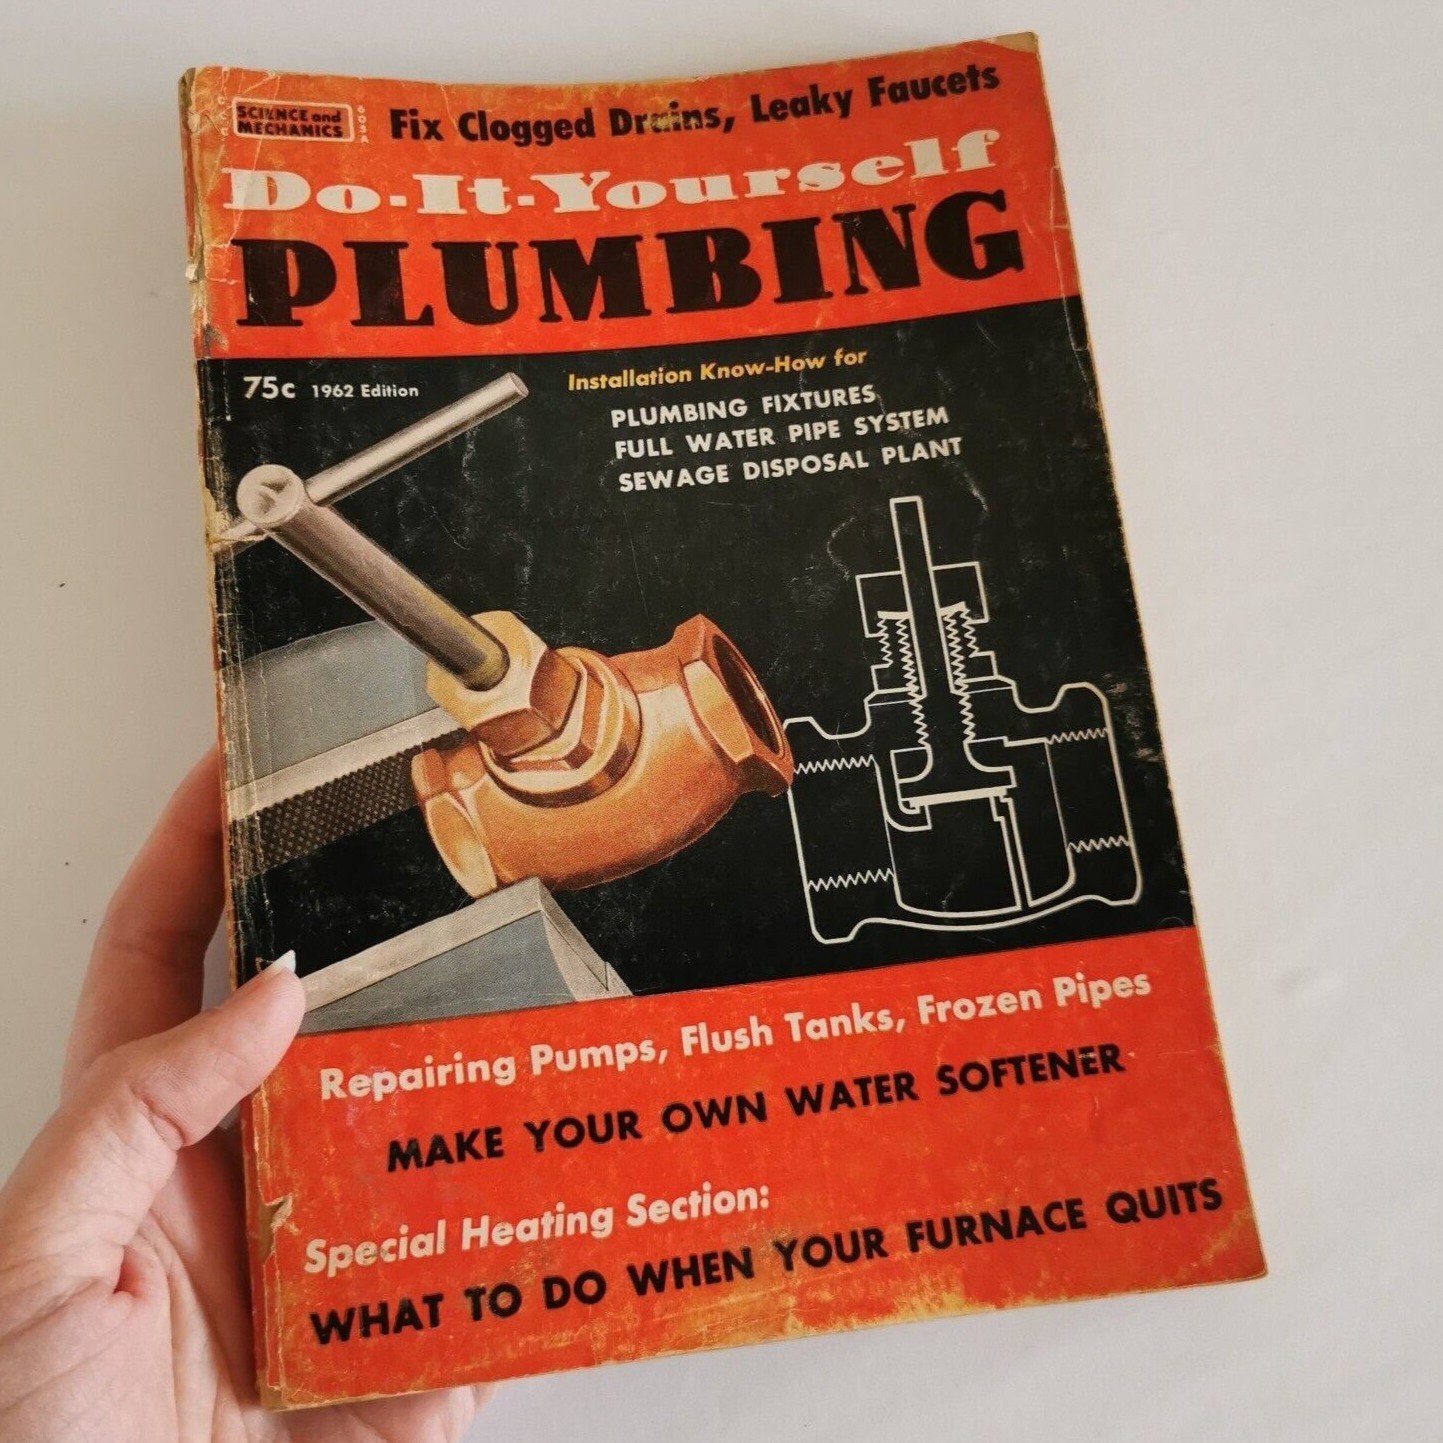 How to Fix a Clogged Drain: The Definitive Guide